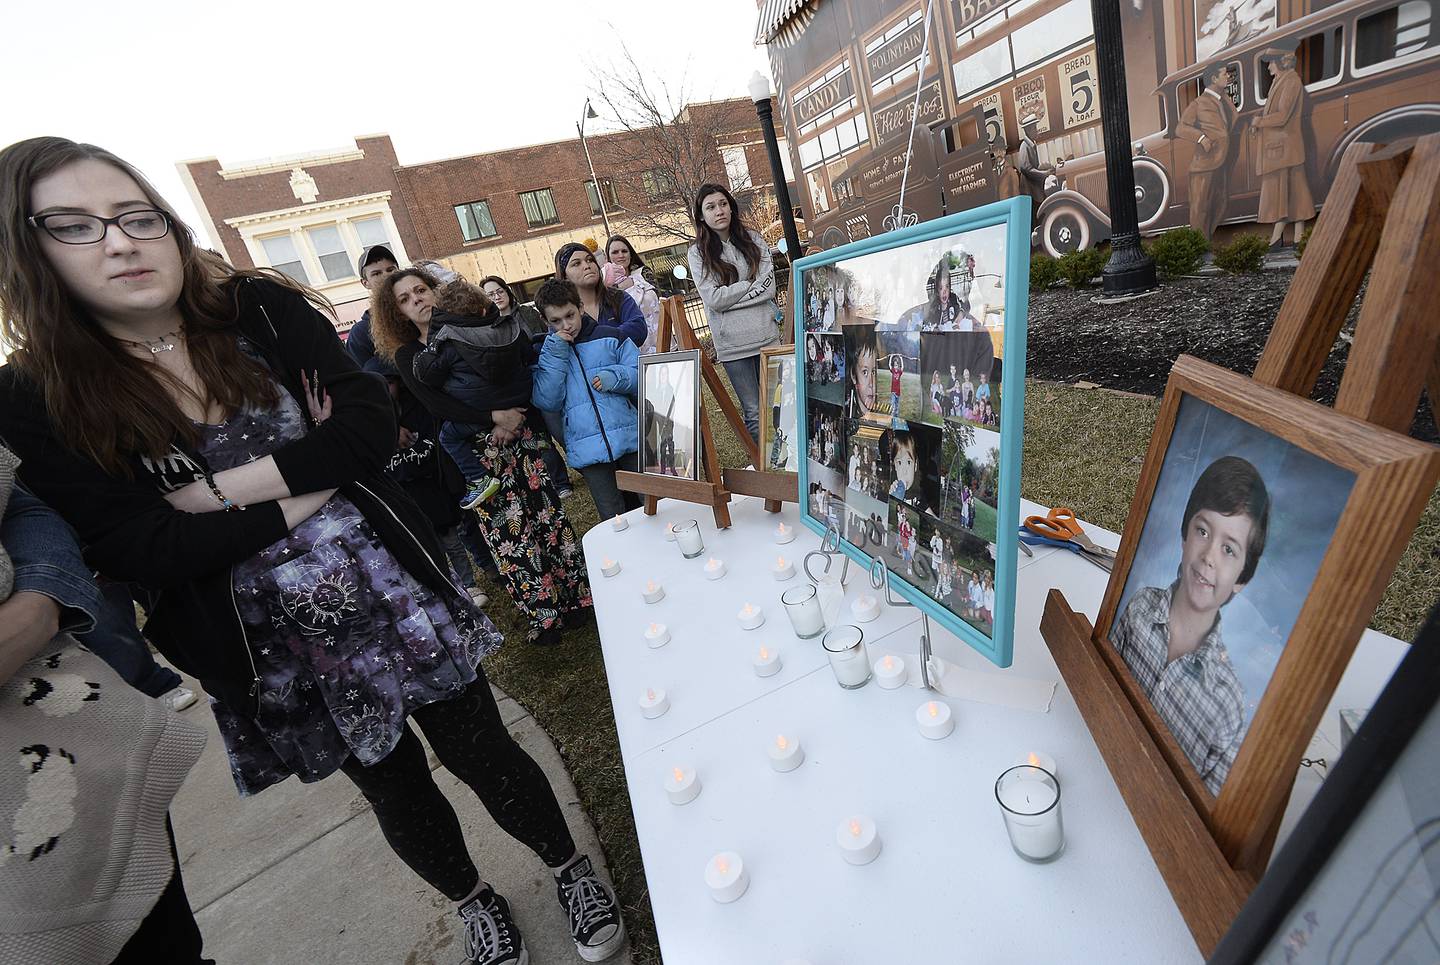 Photos of Dalton Mesarchik were on display for those gathered Sunday, March 26, 2023, at Heritage Park in Streator during a memorial on the 20th anniversary of his murder.